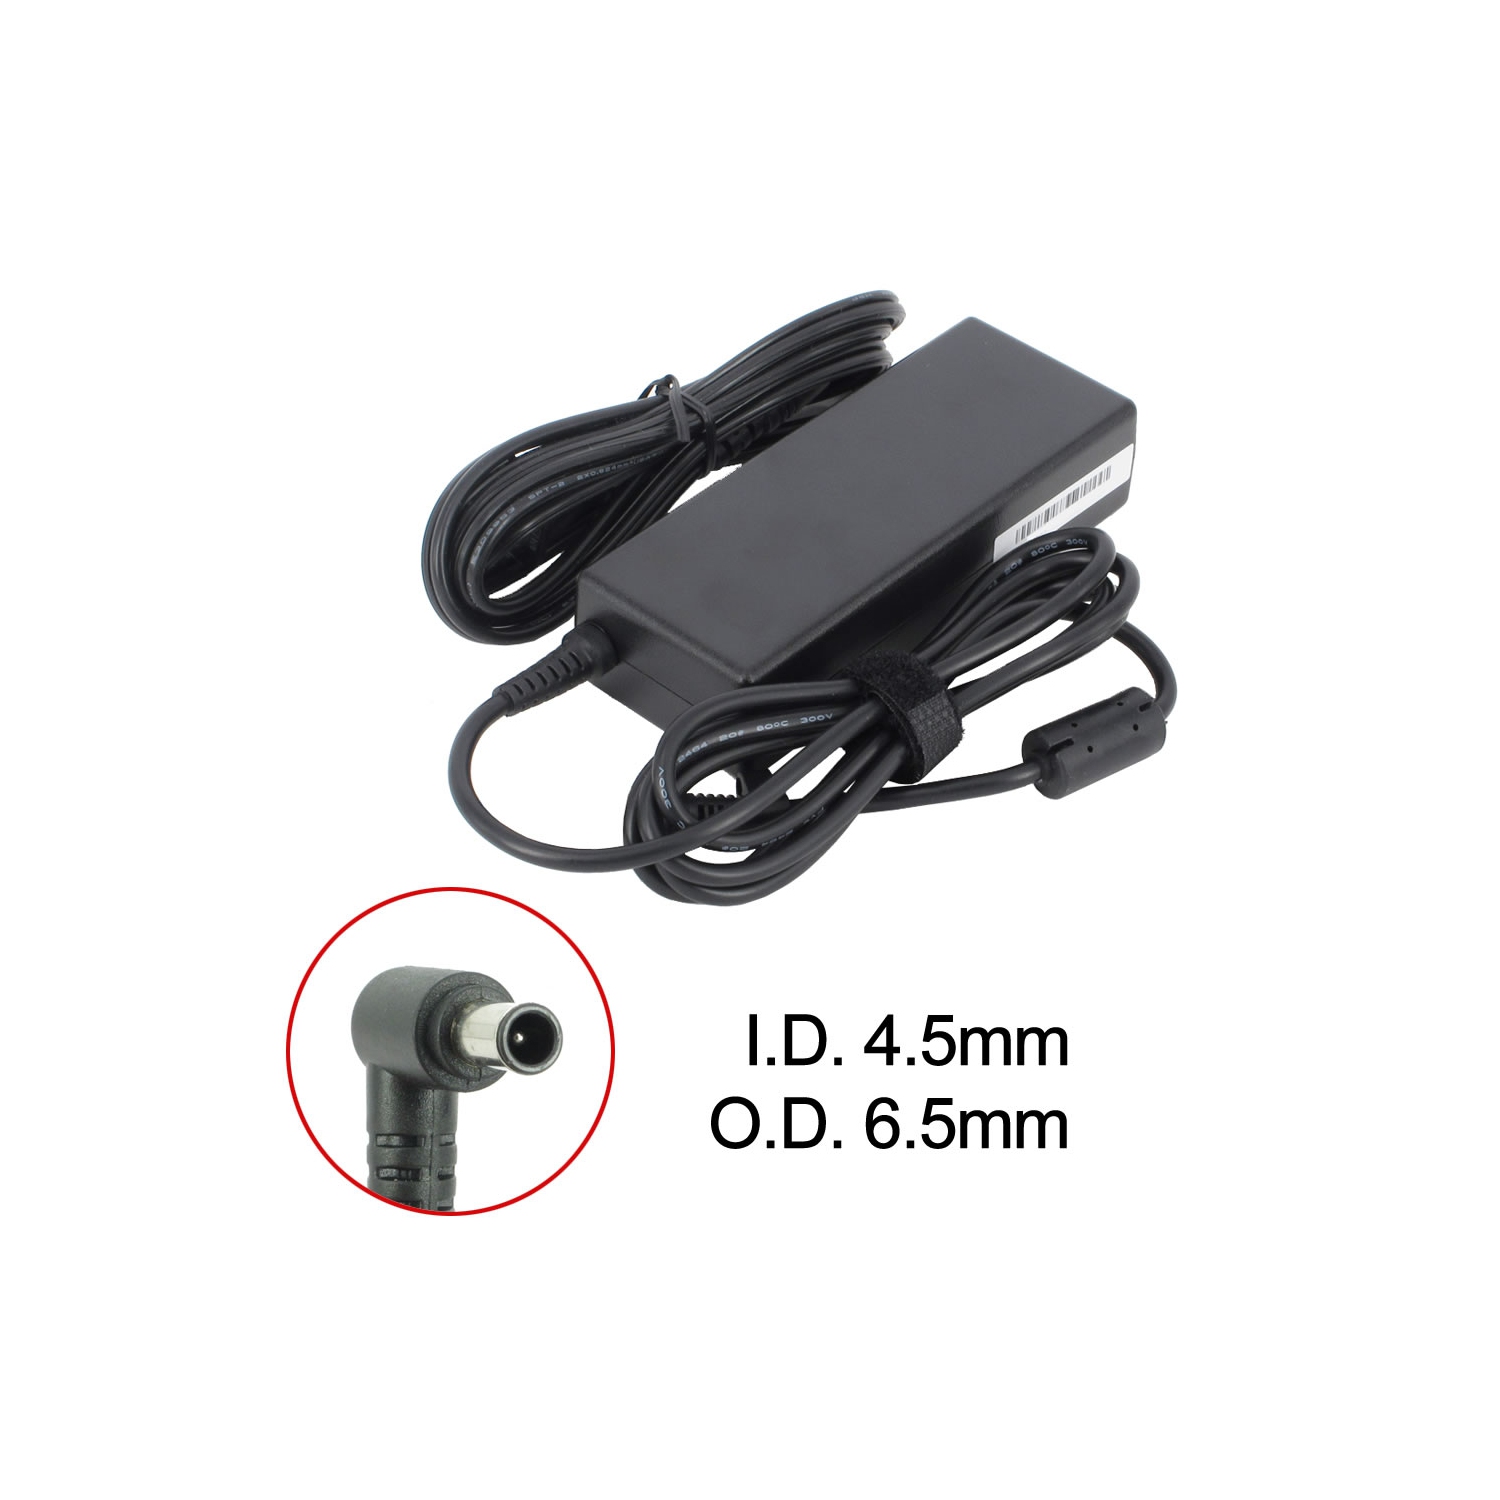 Brand New Laptop AC Adapter for LG XNOTE AD510, ADP-90TH A, PCGA-AC19V19, VGP-AC19V14, VGP-AC19V26, VGP-AC19V43